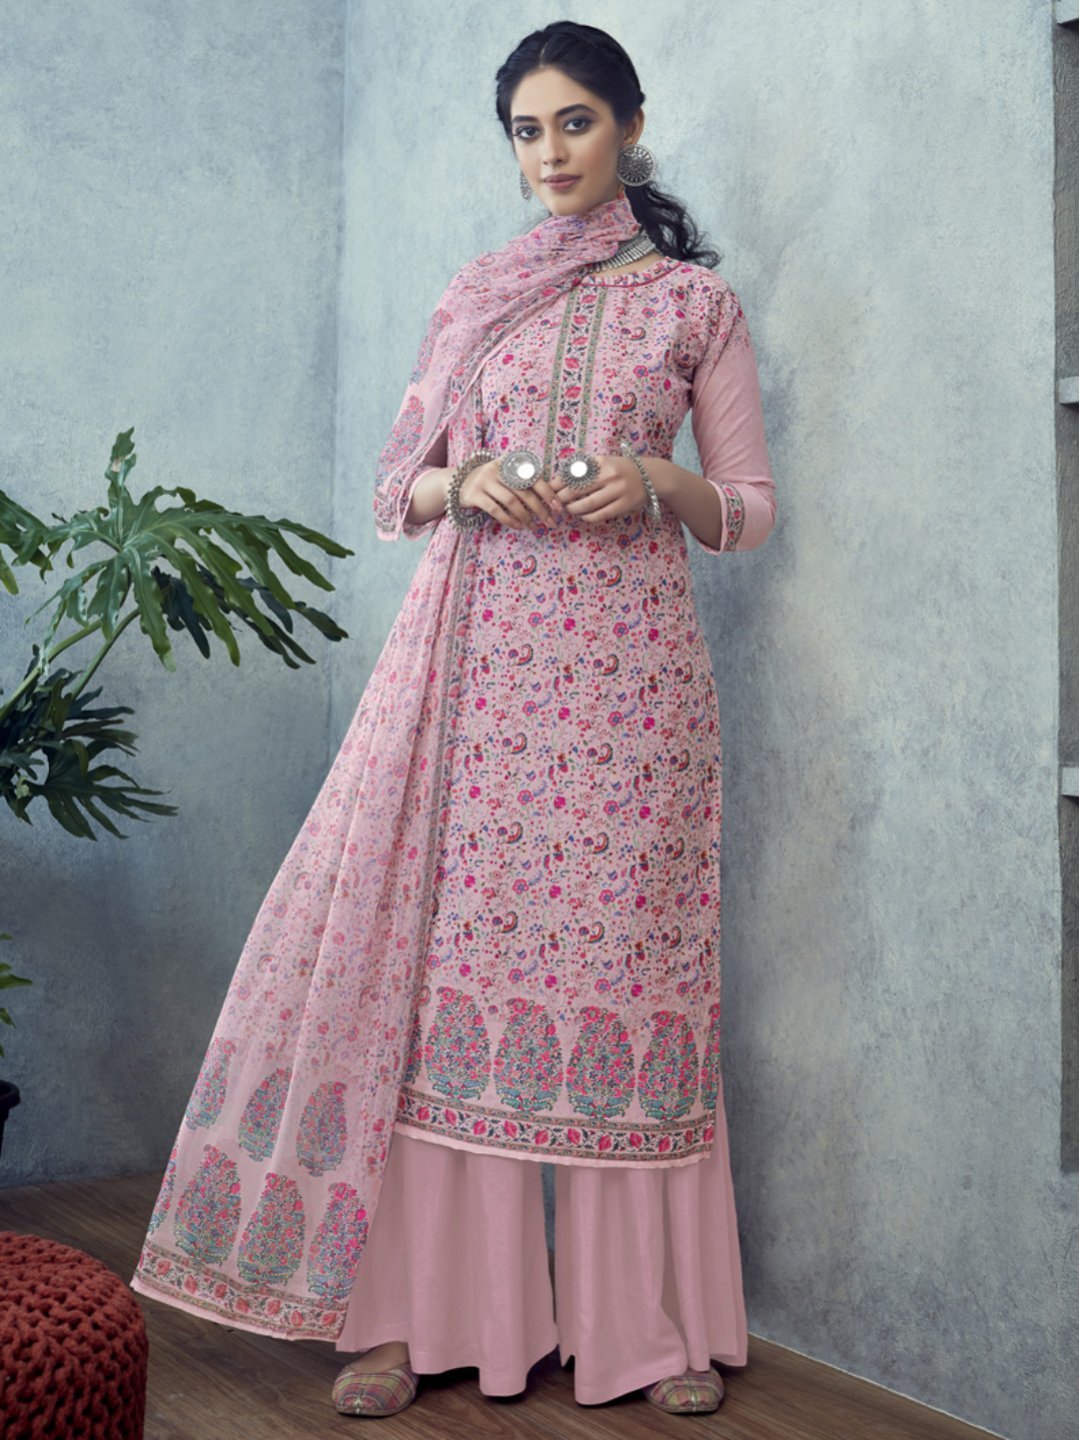 Printed Un-Stitched Pink Palazzo Suit Material with Dupatta - Stilento